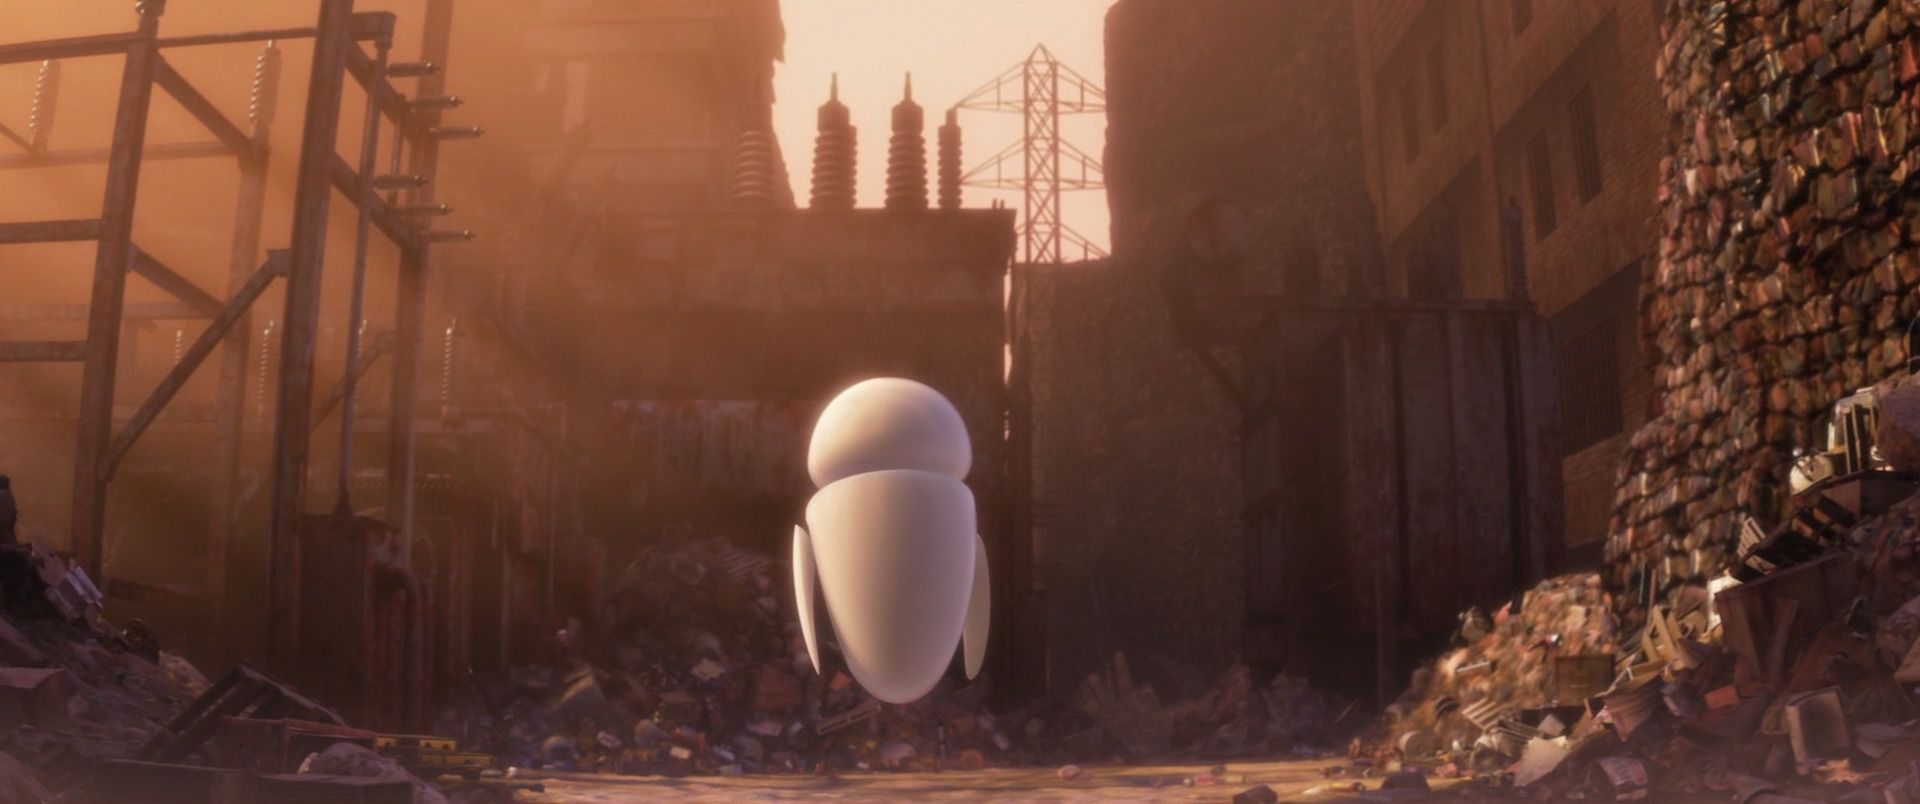 EVE looking out over all of the trash still left on earth in WALL-E.